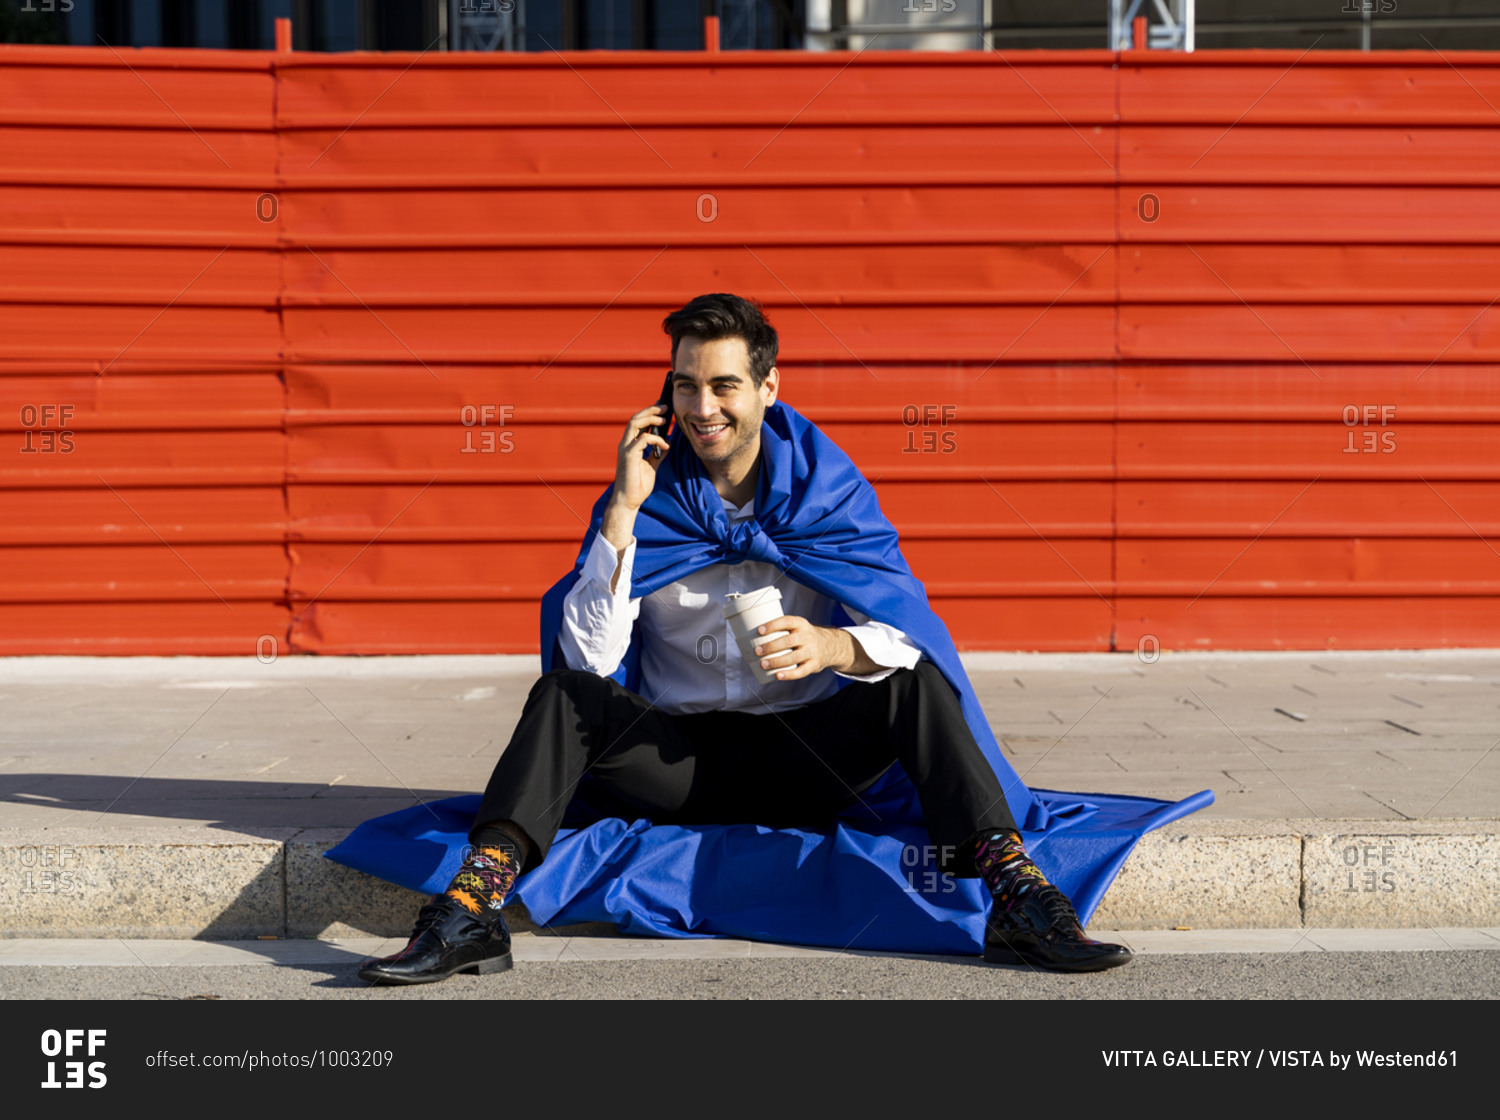 Smiling businessman on the phone wearing superhero cape sitting on curb